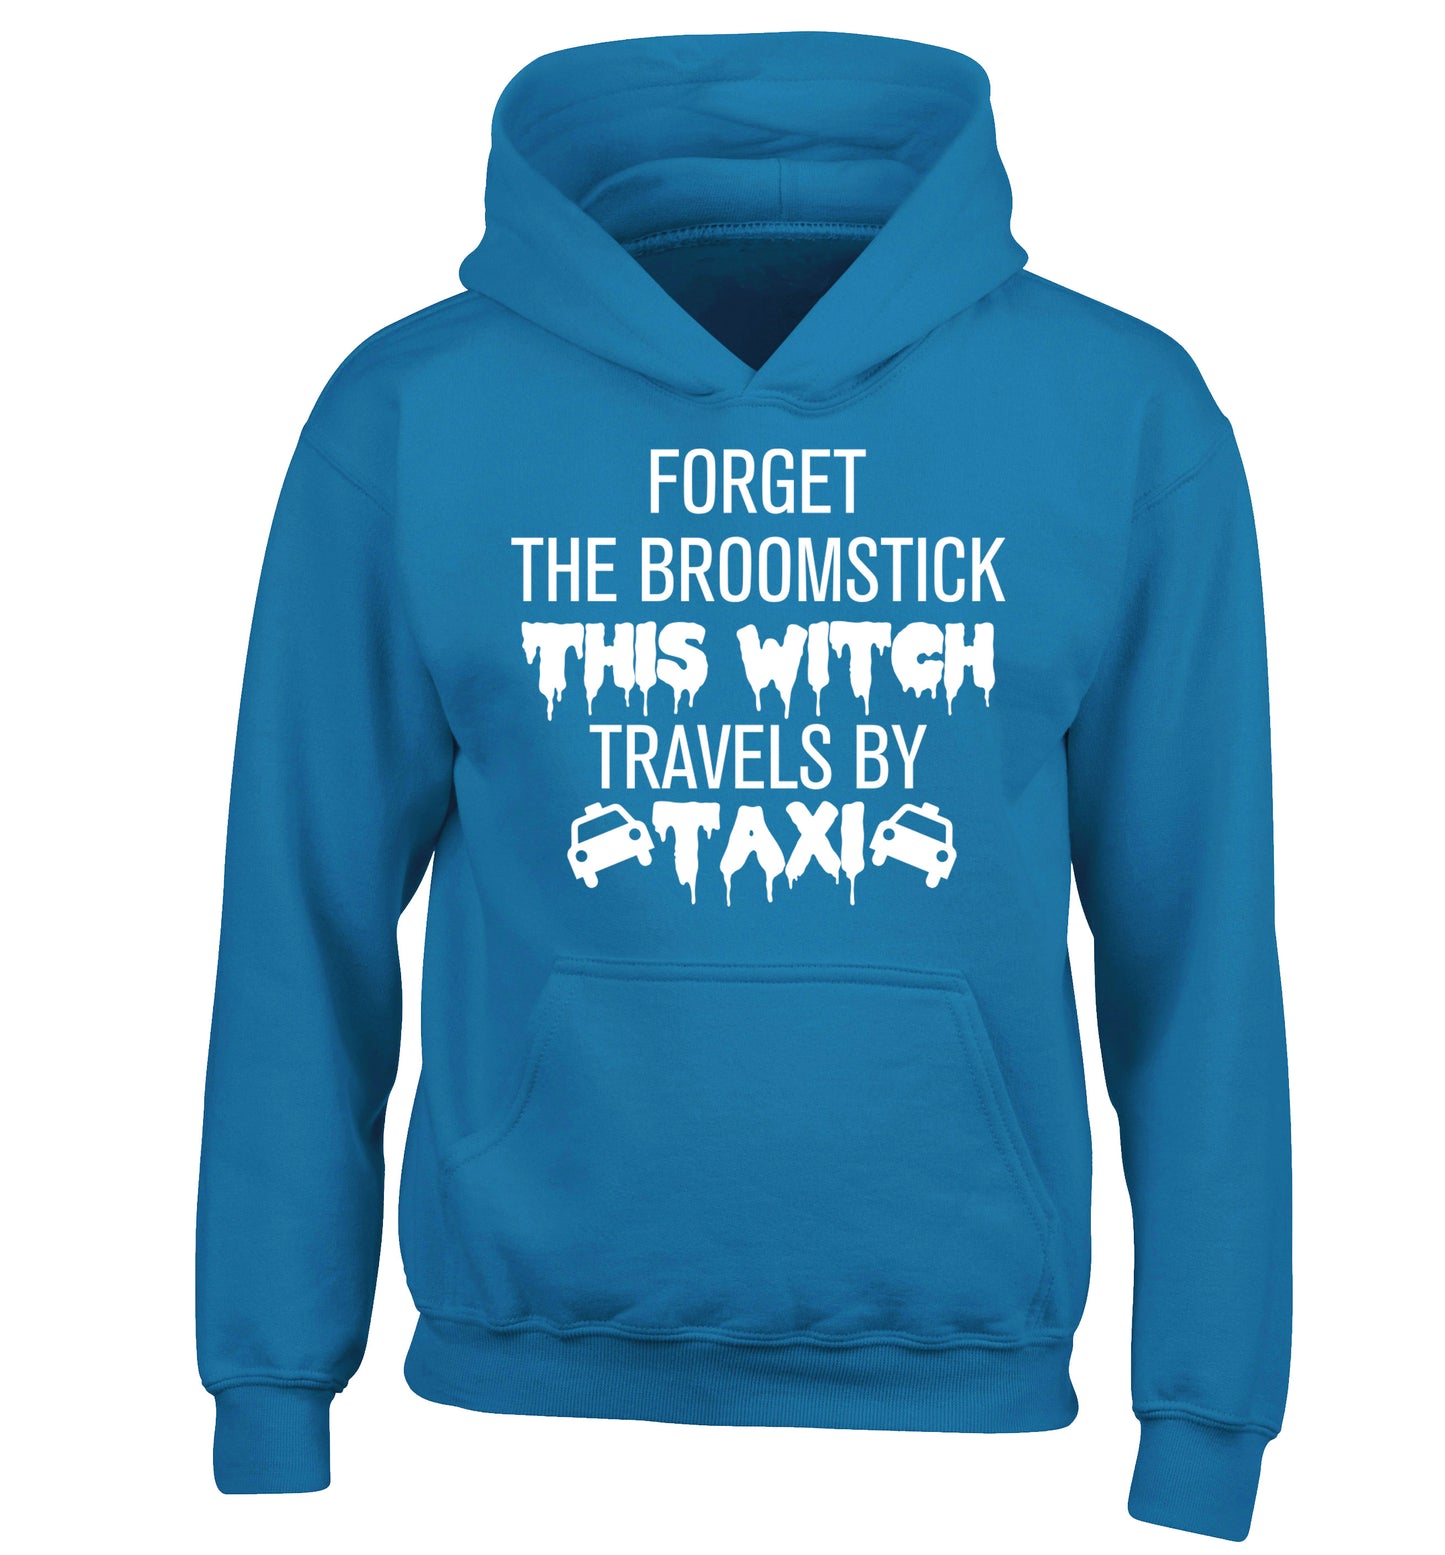 Forget the broomstick this witch travels by taxi children's blue hoodie 12-14 Years